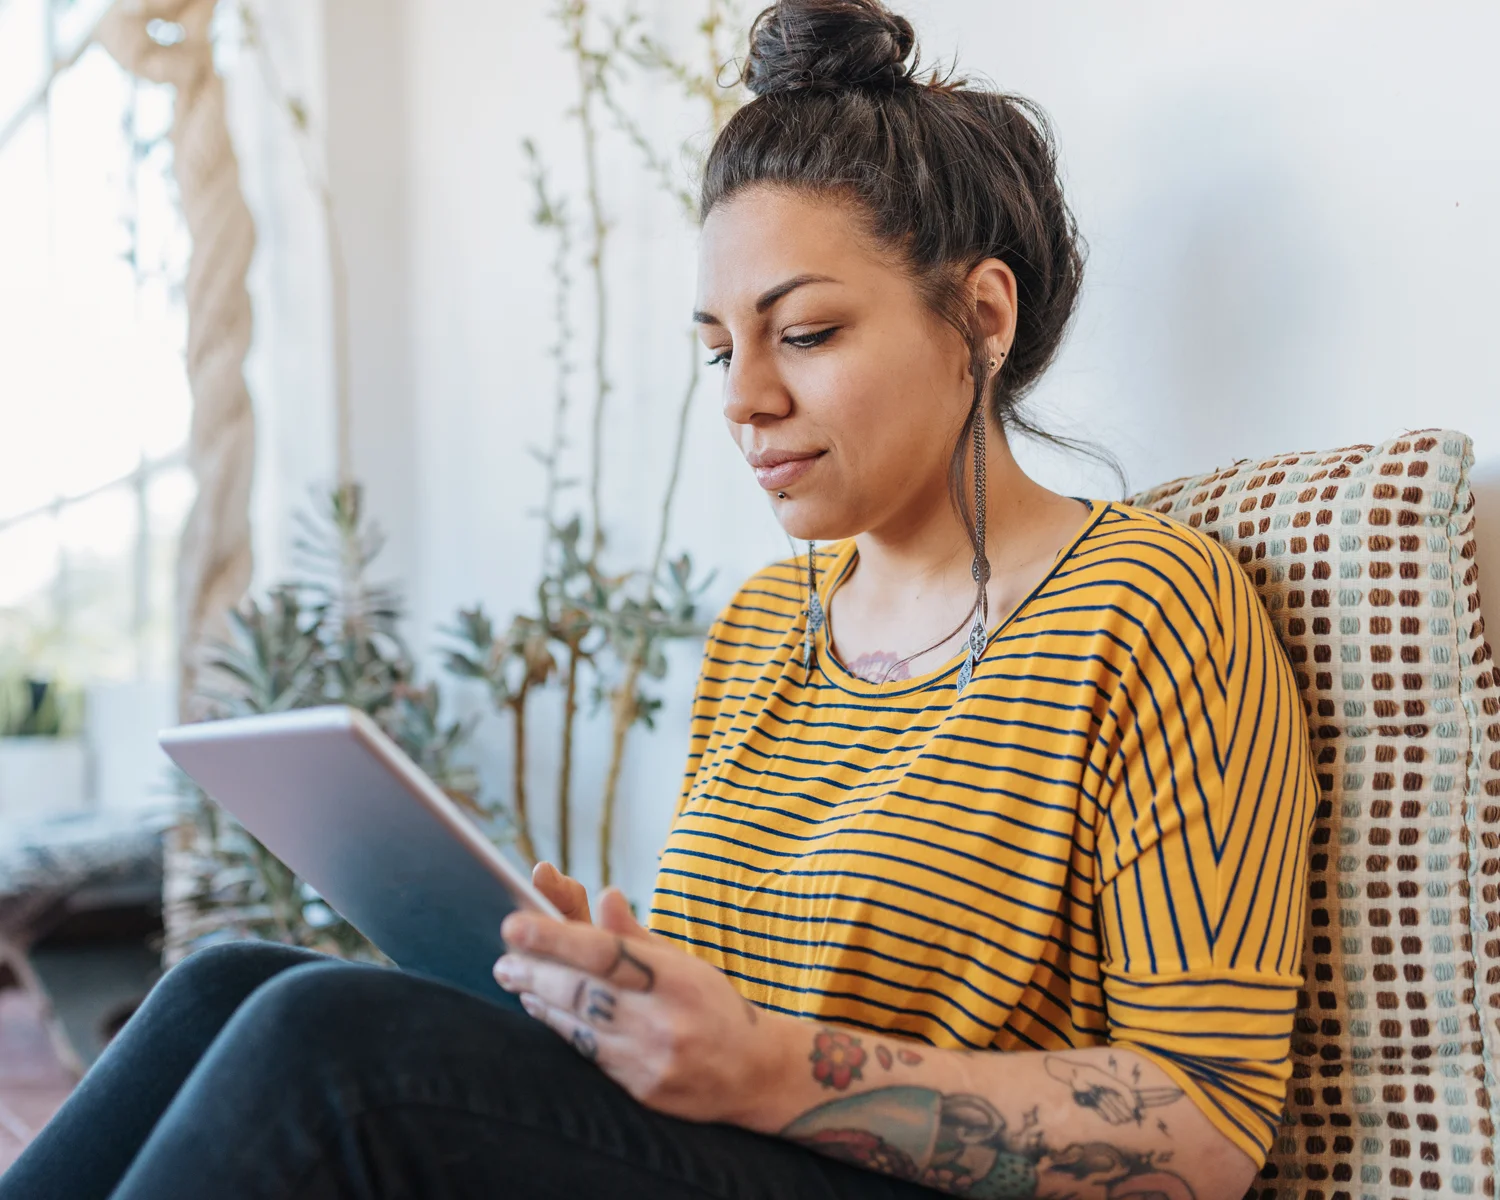 Woman with tattoos sitting at her laptop